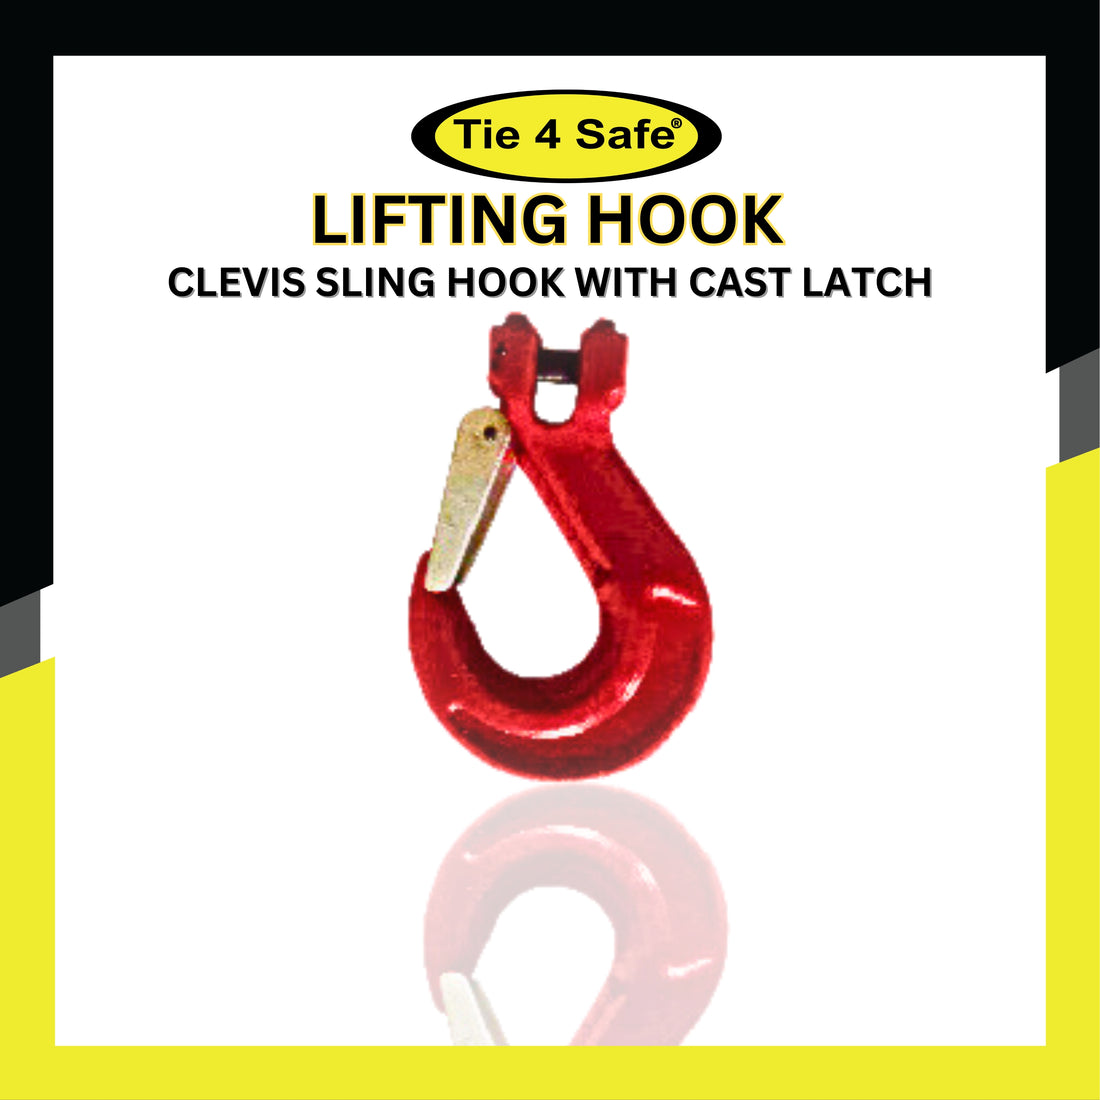 Clevis Sling Hook With Cast Latch